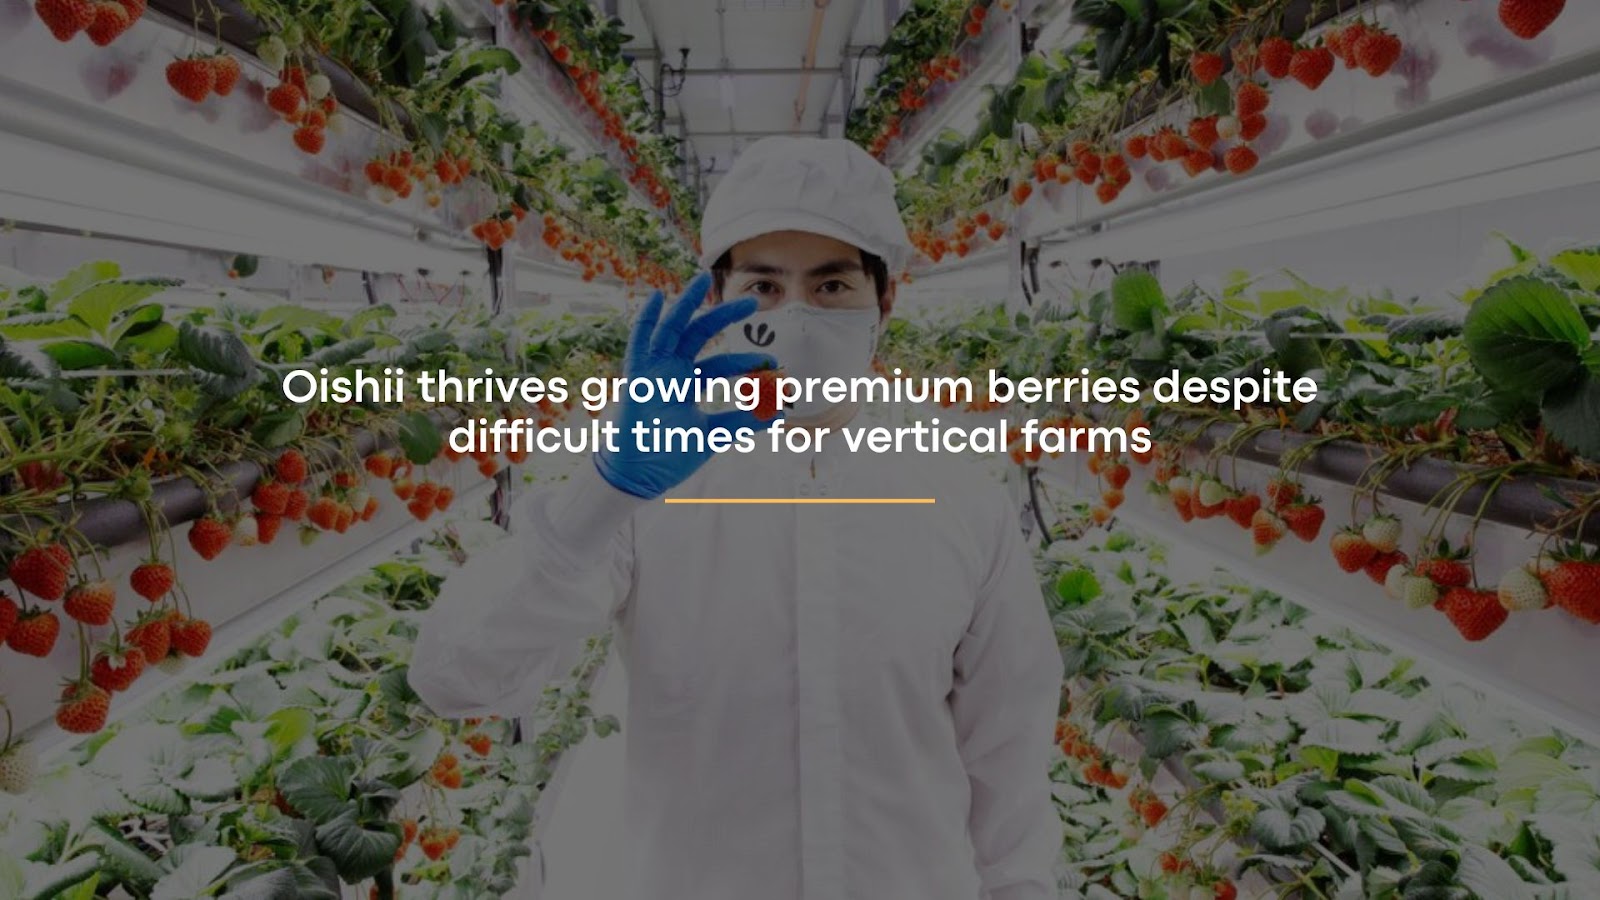 Oishii thrives growing premium berries despite difficult times for vertical farms